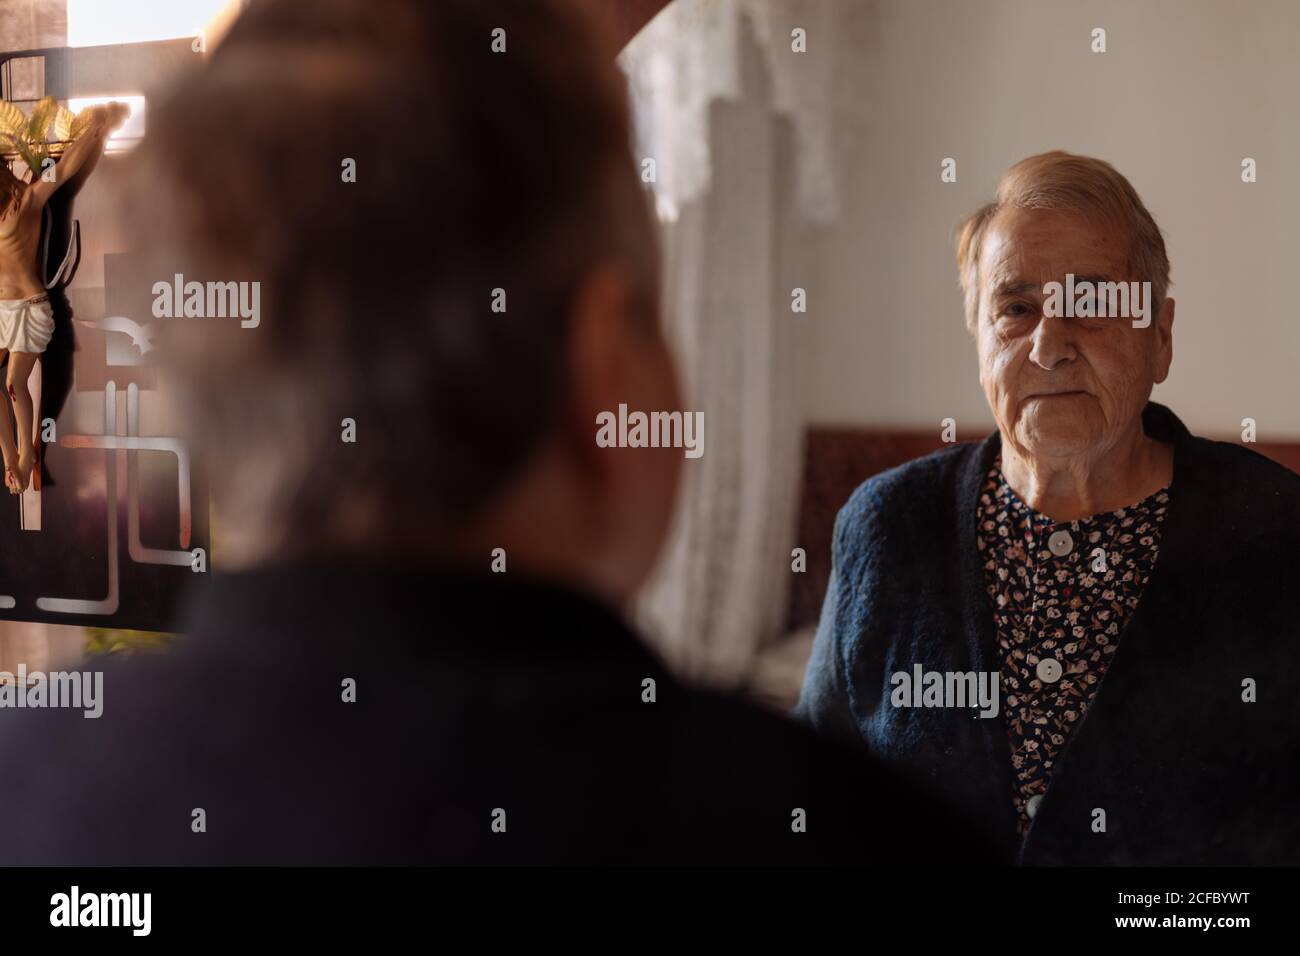 Elderly person looking in the mirror of his house Stock Photo